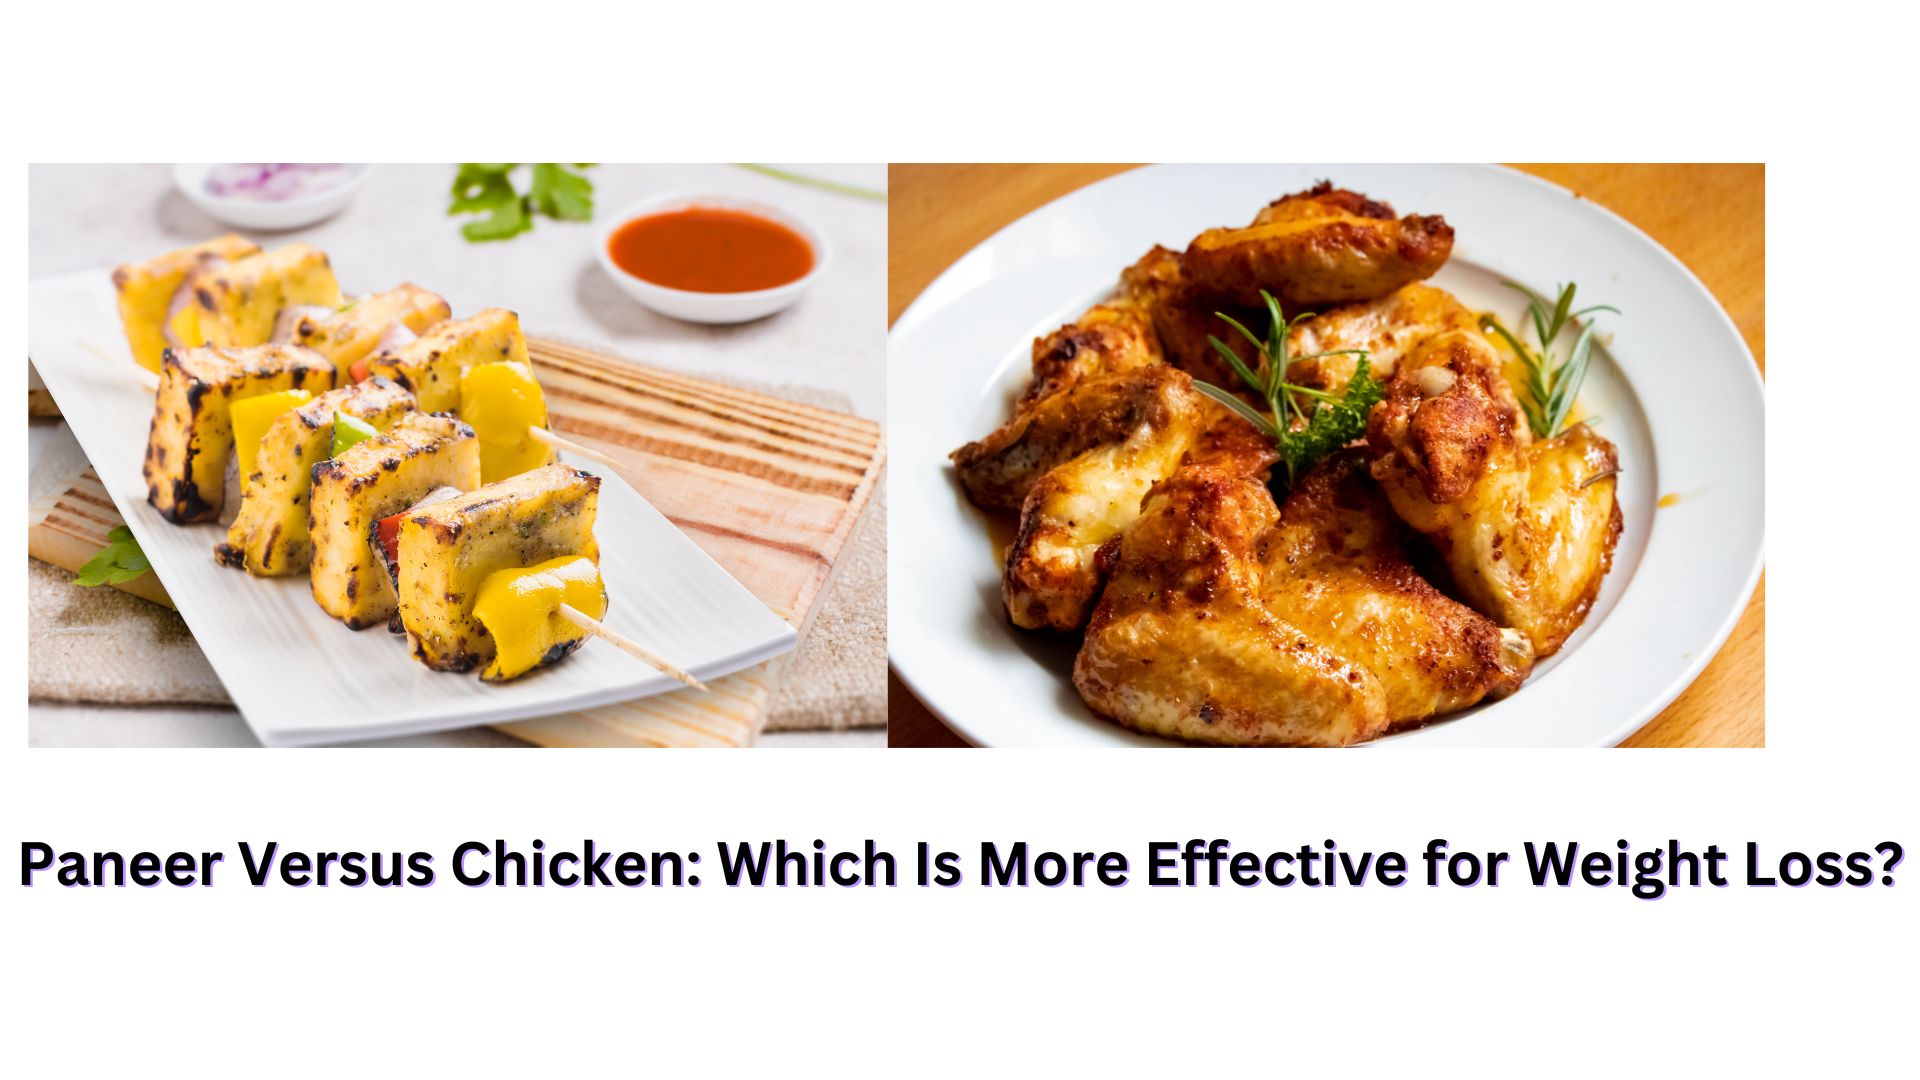 Paneer Versus Chicken: Which Is More Effective for Weight Loss?